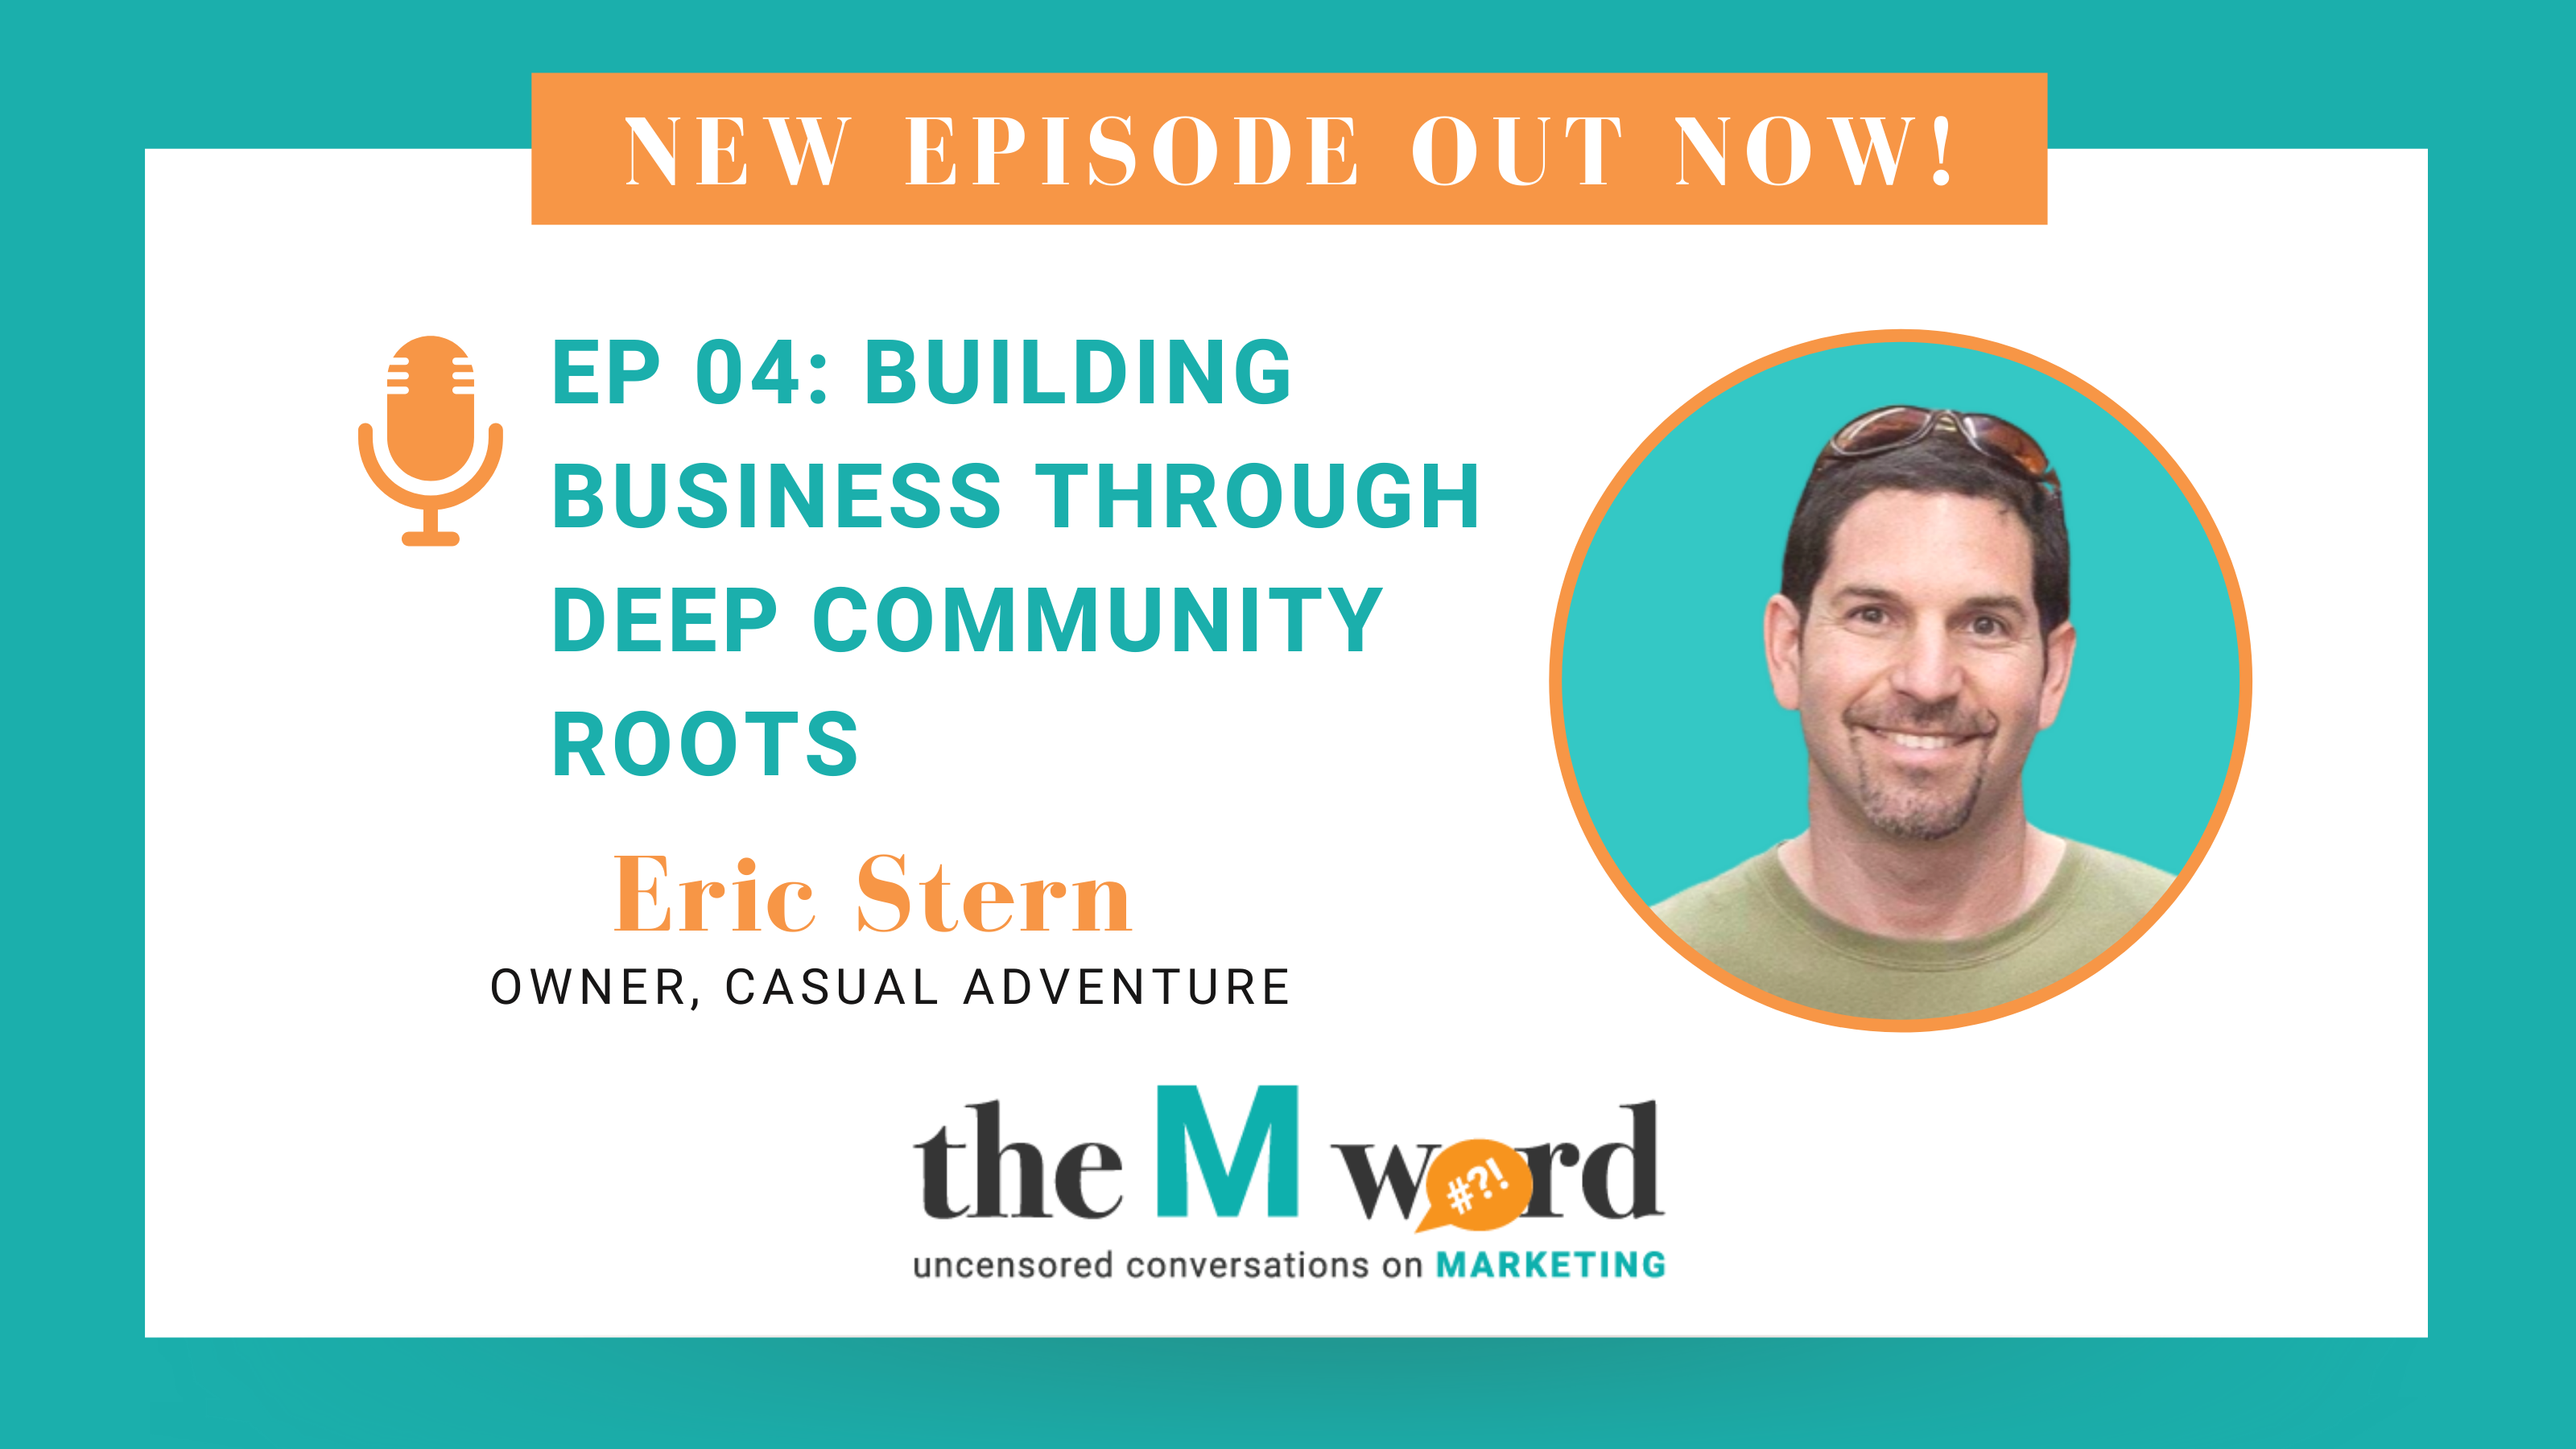 Episode 4 of The M Word with Eric Stern, owner of Casual Adventure - Building Business Through Deep Community Roots